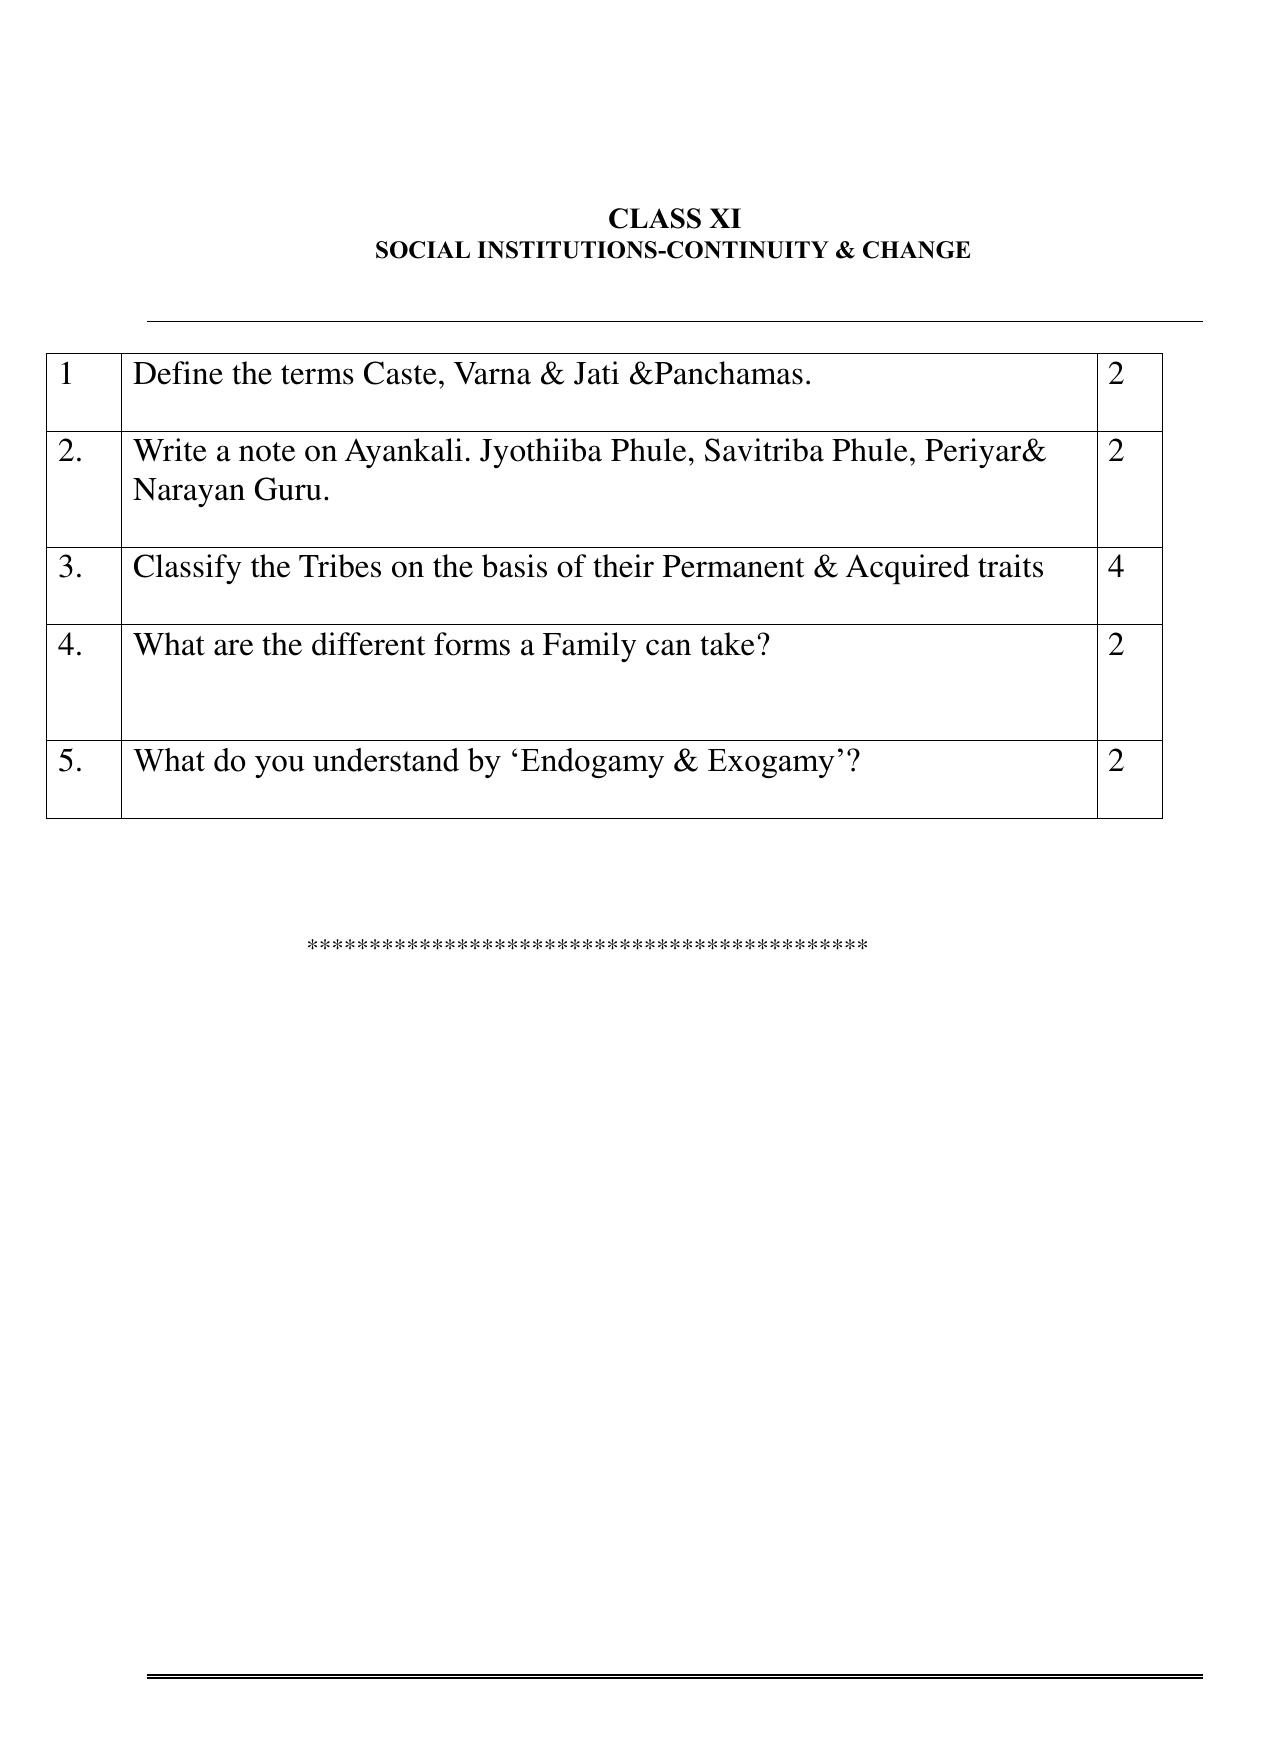 CBSE Worksheets for Class 11 Sociology Social Institutions Continuity Change Assignment - Page 1